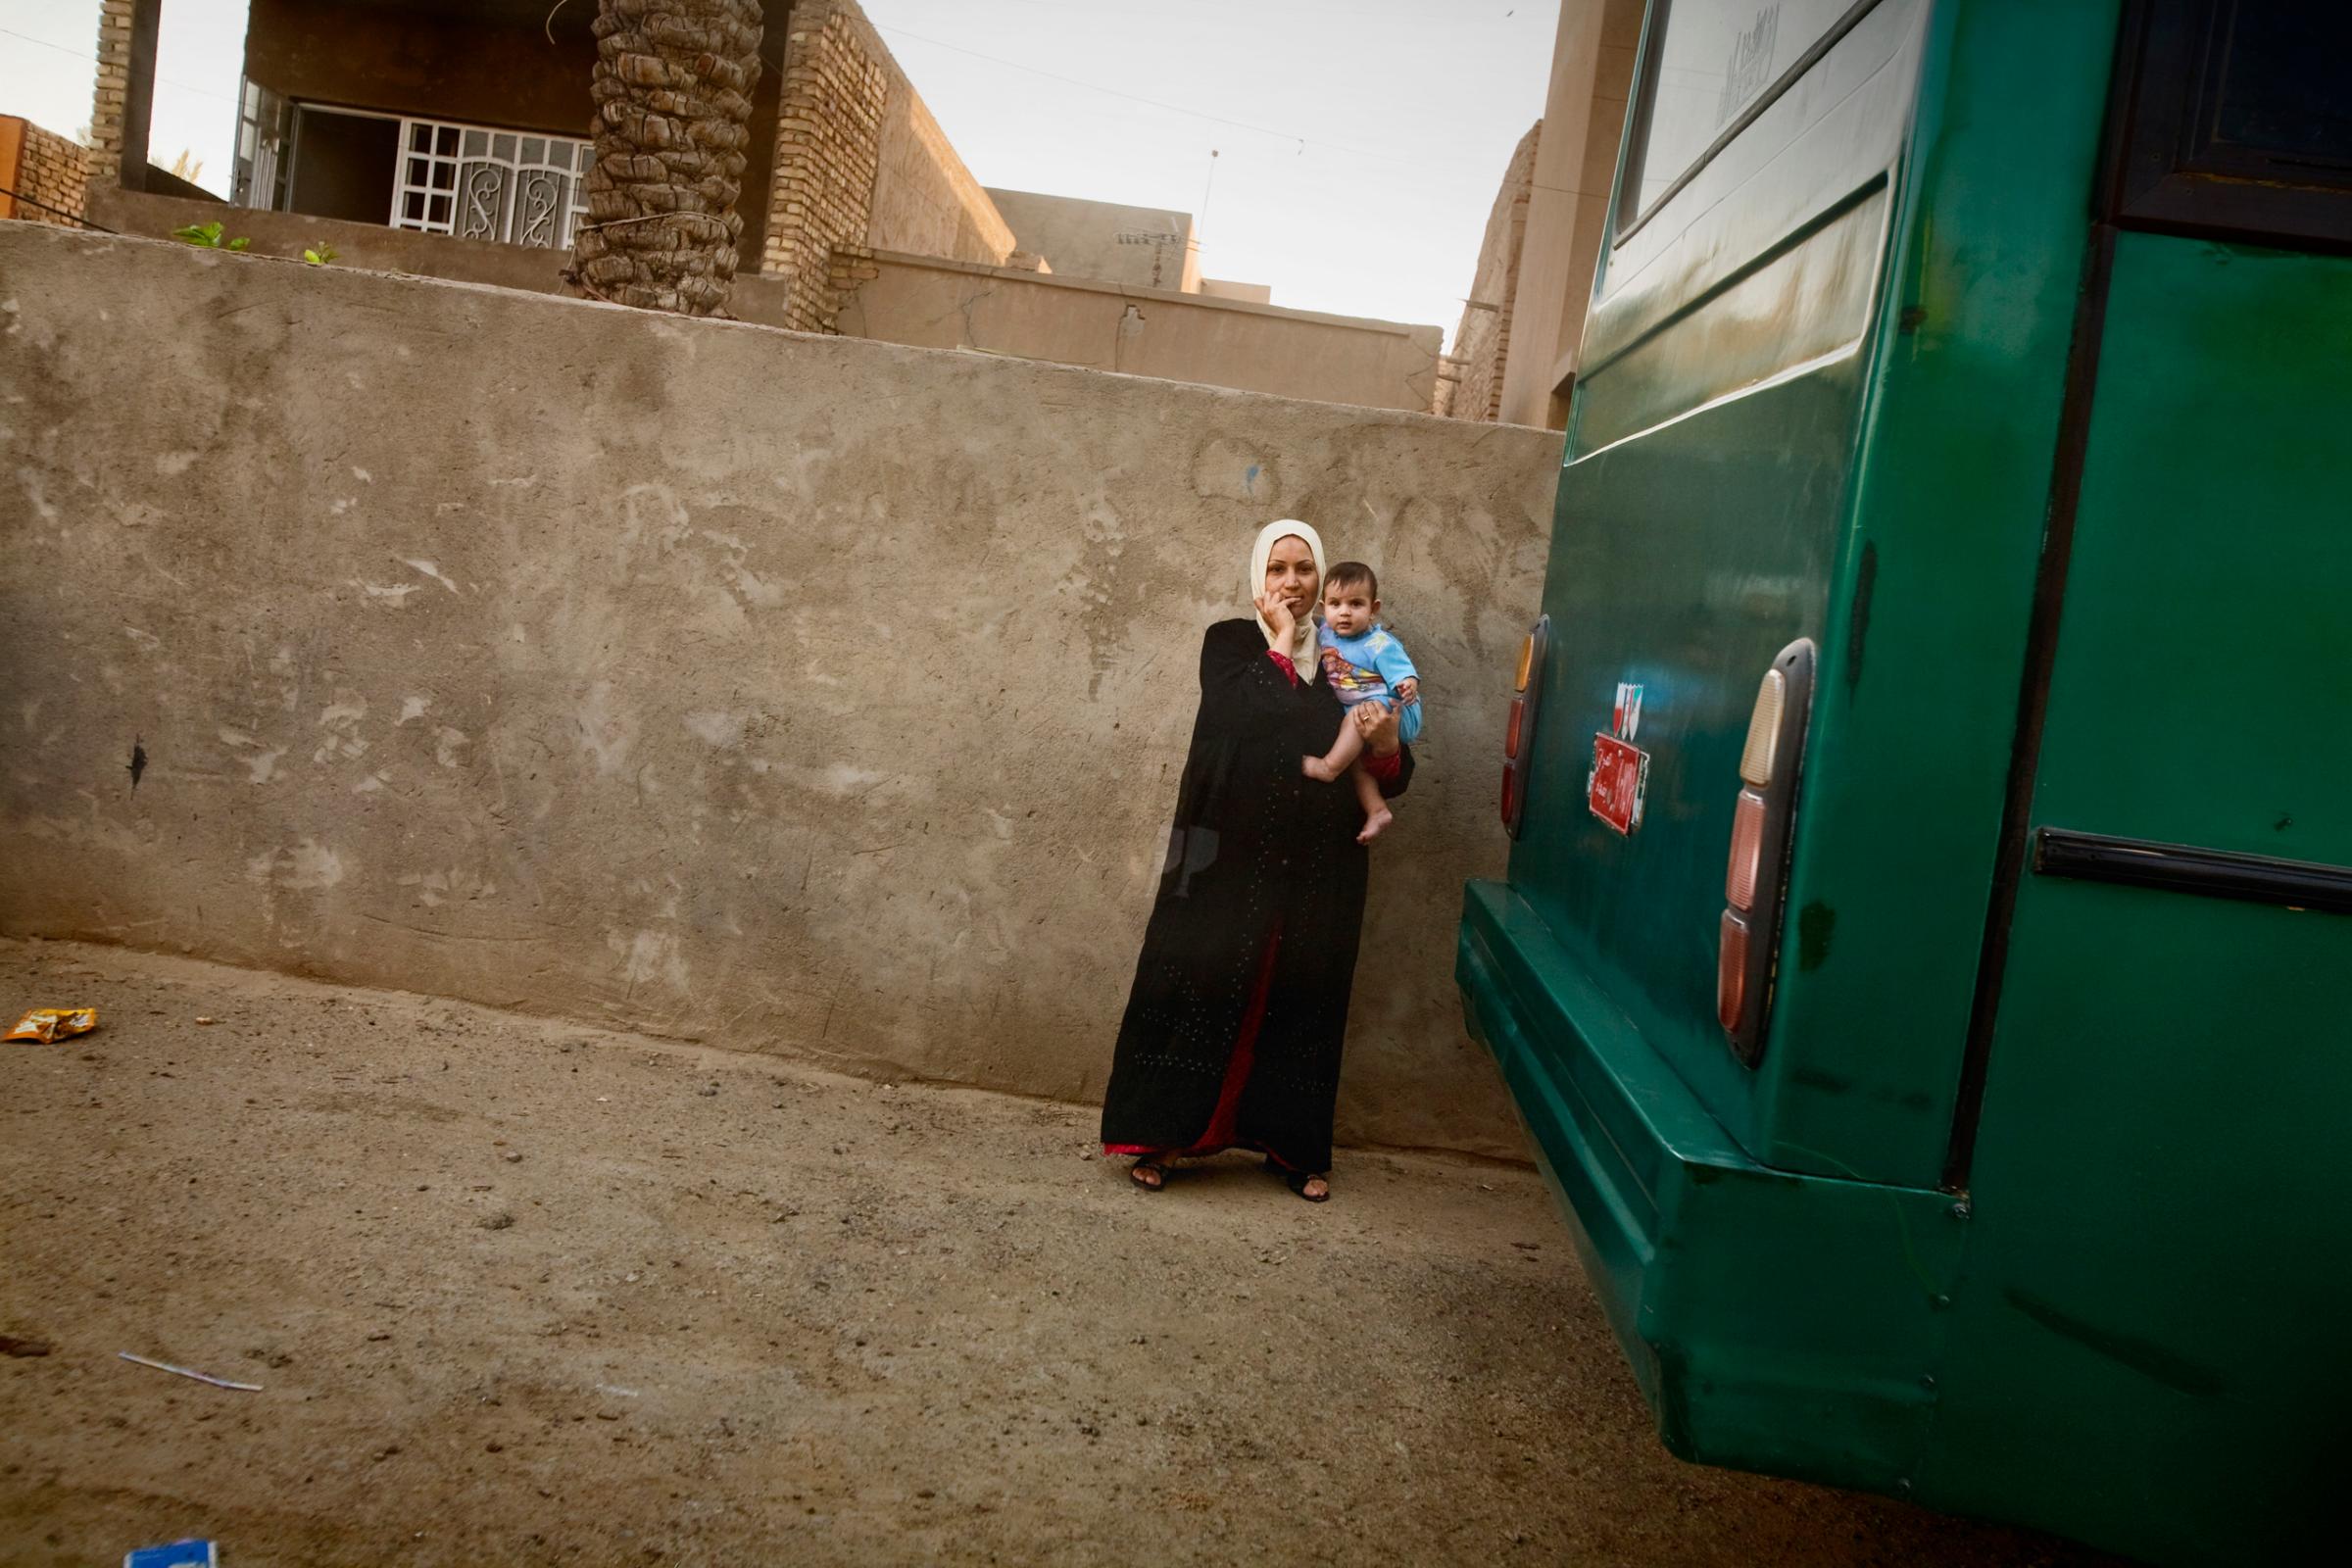 A woman holds her child outside her home in the al Doura district of Baghdad, Iraq, June 5, 2007. As sectarian tensions increased, life in Doura became increasingly dangerous when Iraqi National Policemen, former members of the pro-Shiite Badr Brigades, set up a check point outside the neighborhood and began shooting Sunni civilians, including women and children.